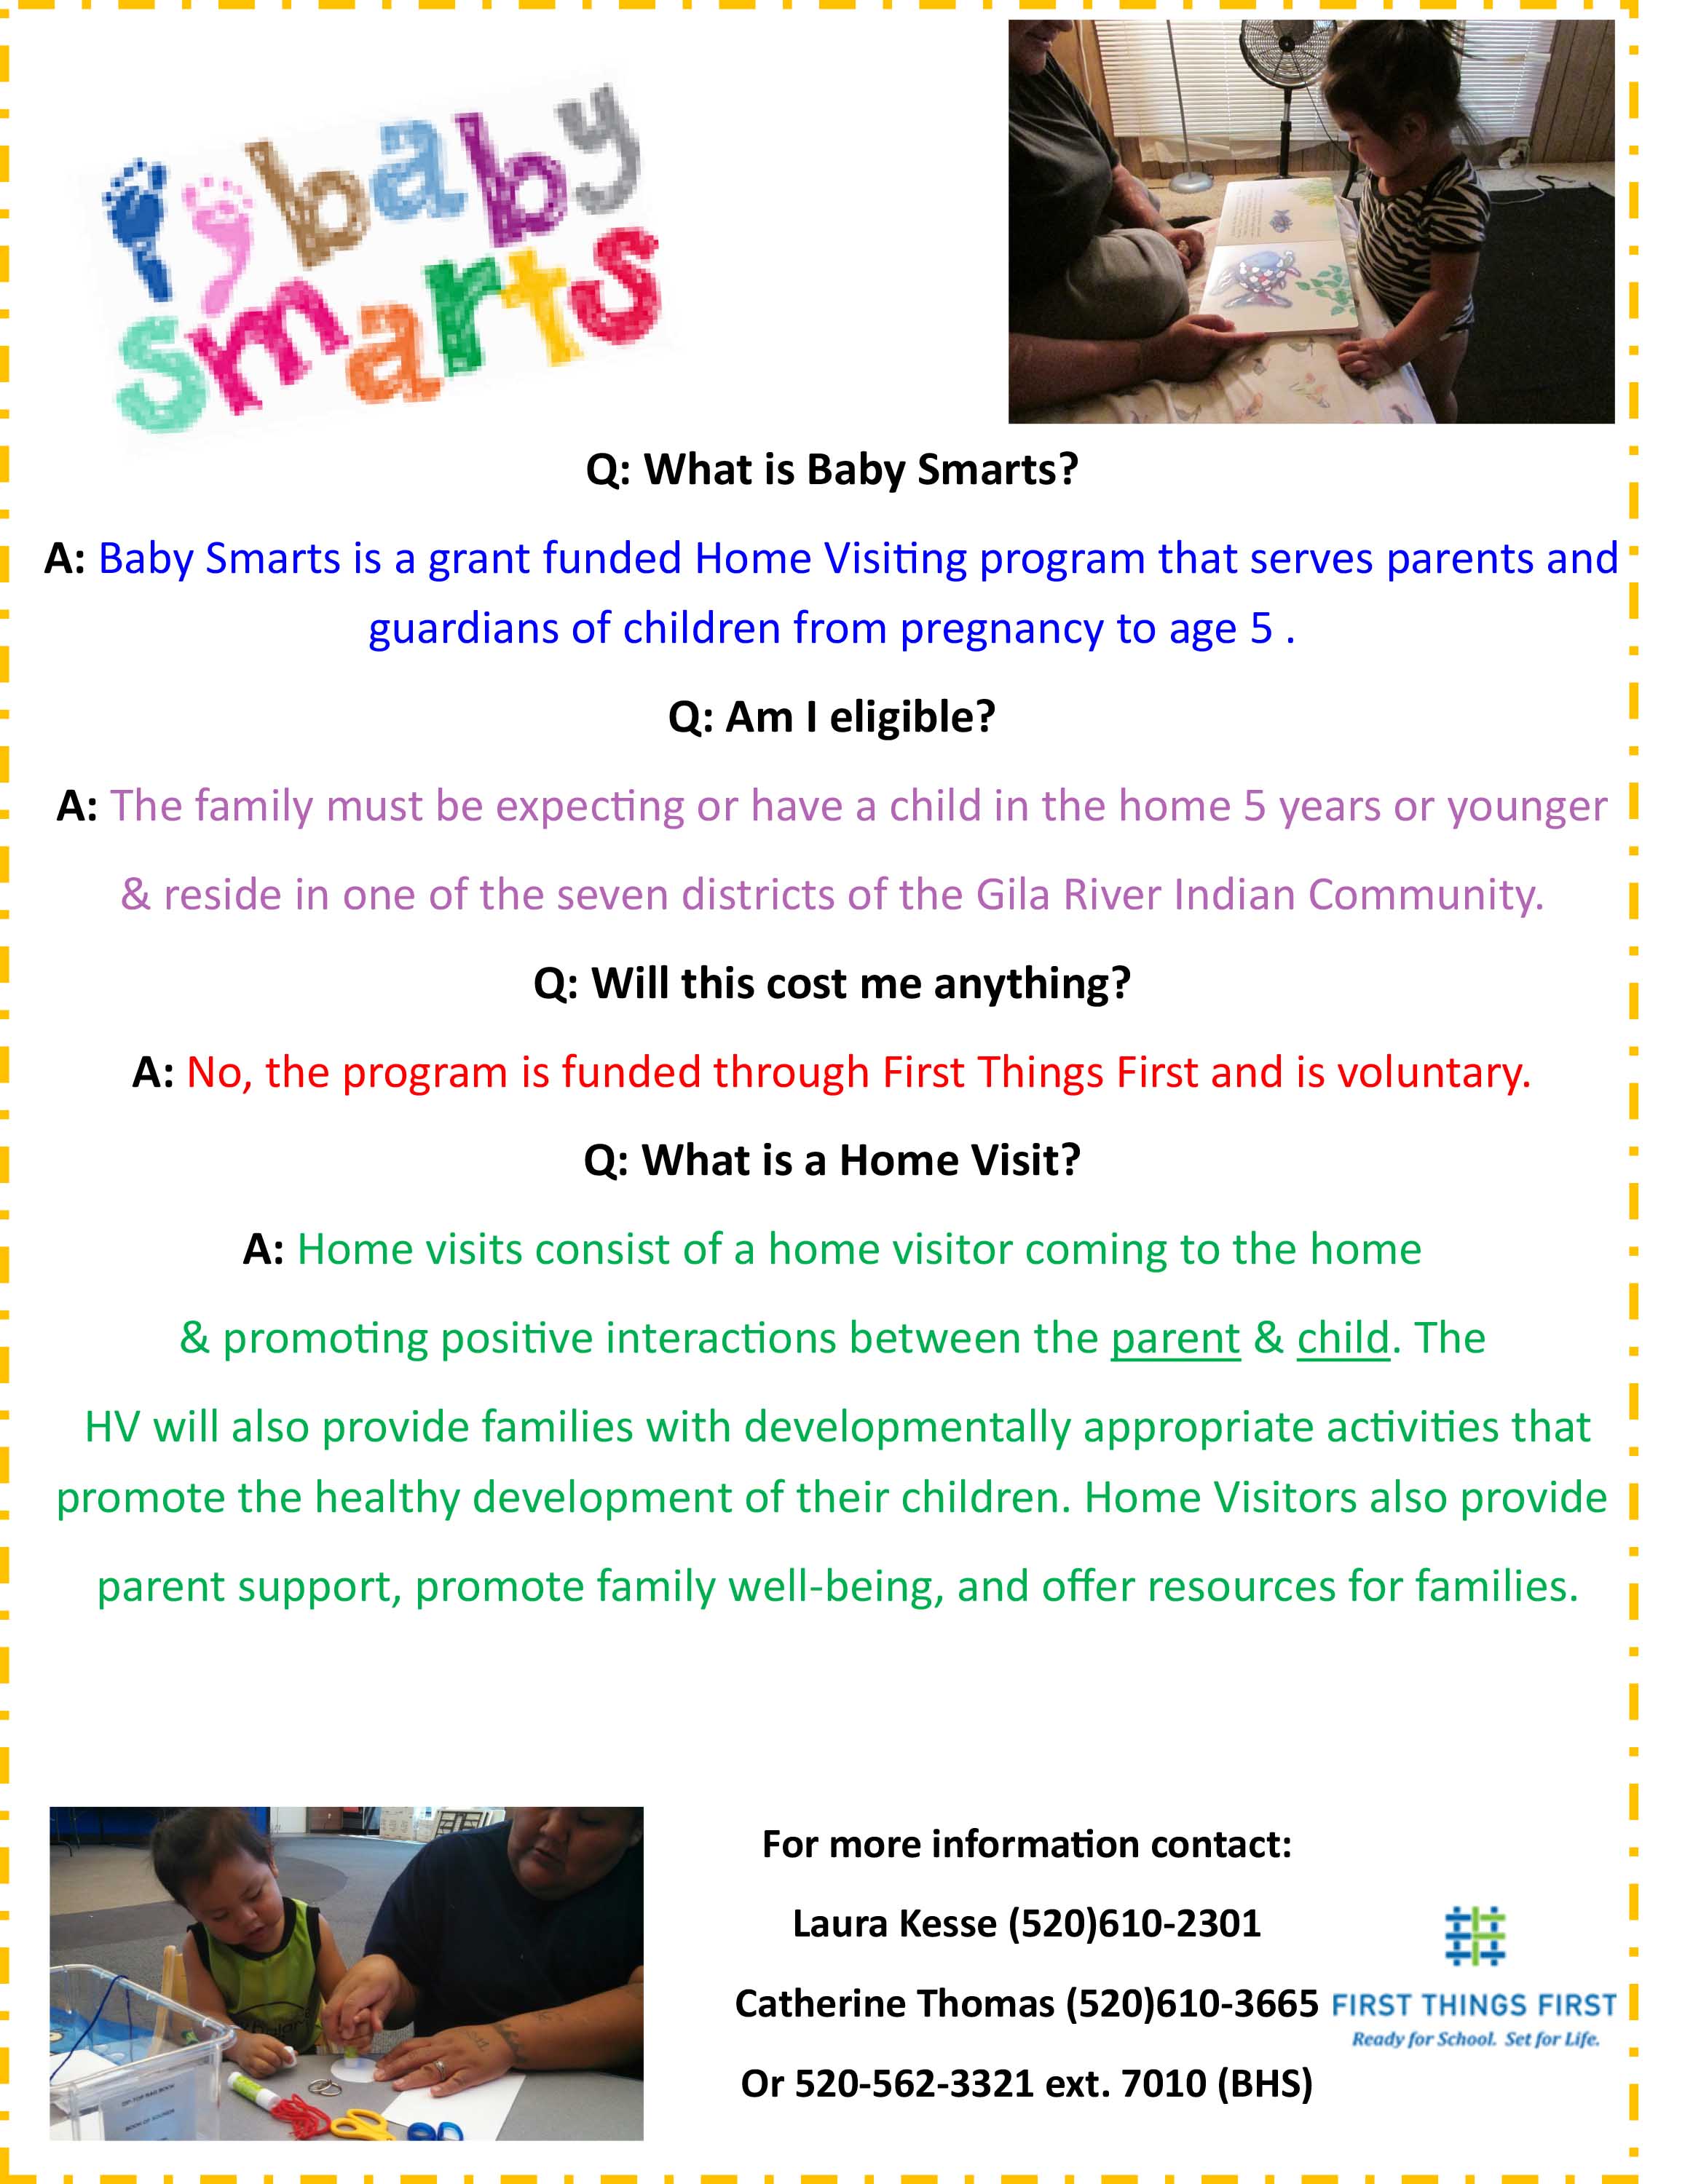 Baby Smarts Promotion Flyer 2016